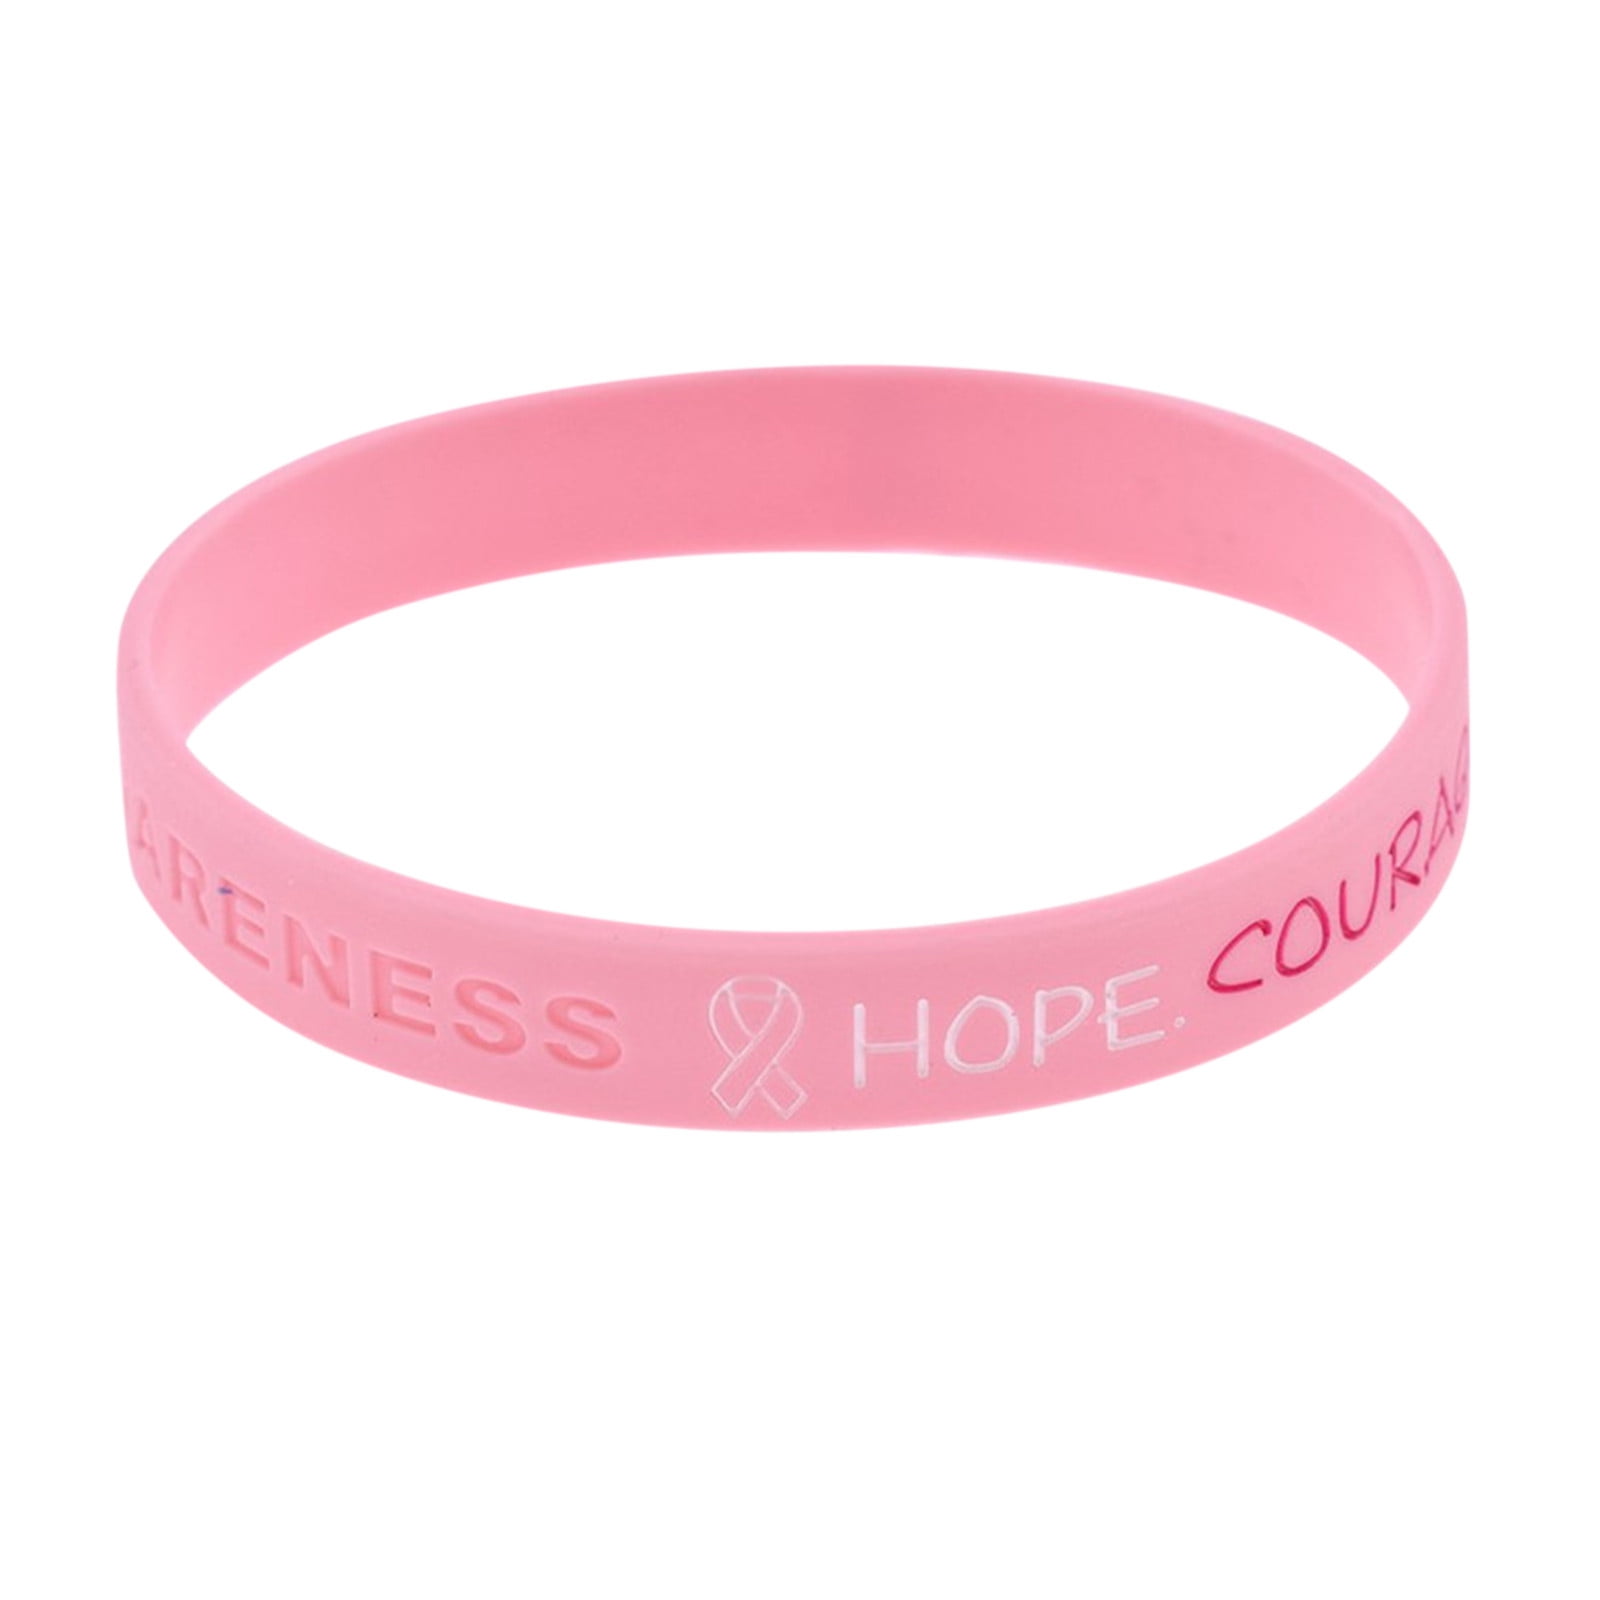 NEW BREAST CANCER AWARENESS 1 PAIR WHITE PINK RIBBON WRIST SPORTBAND ACCESSORY 